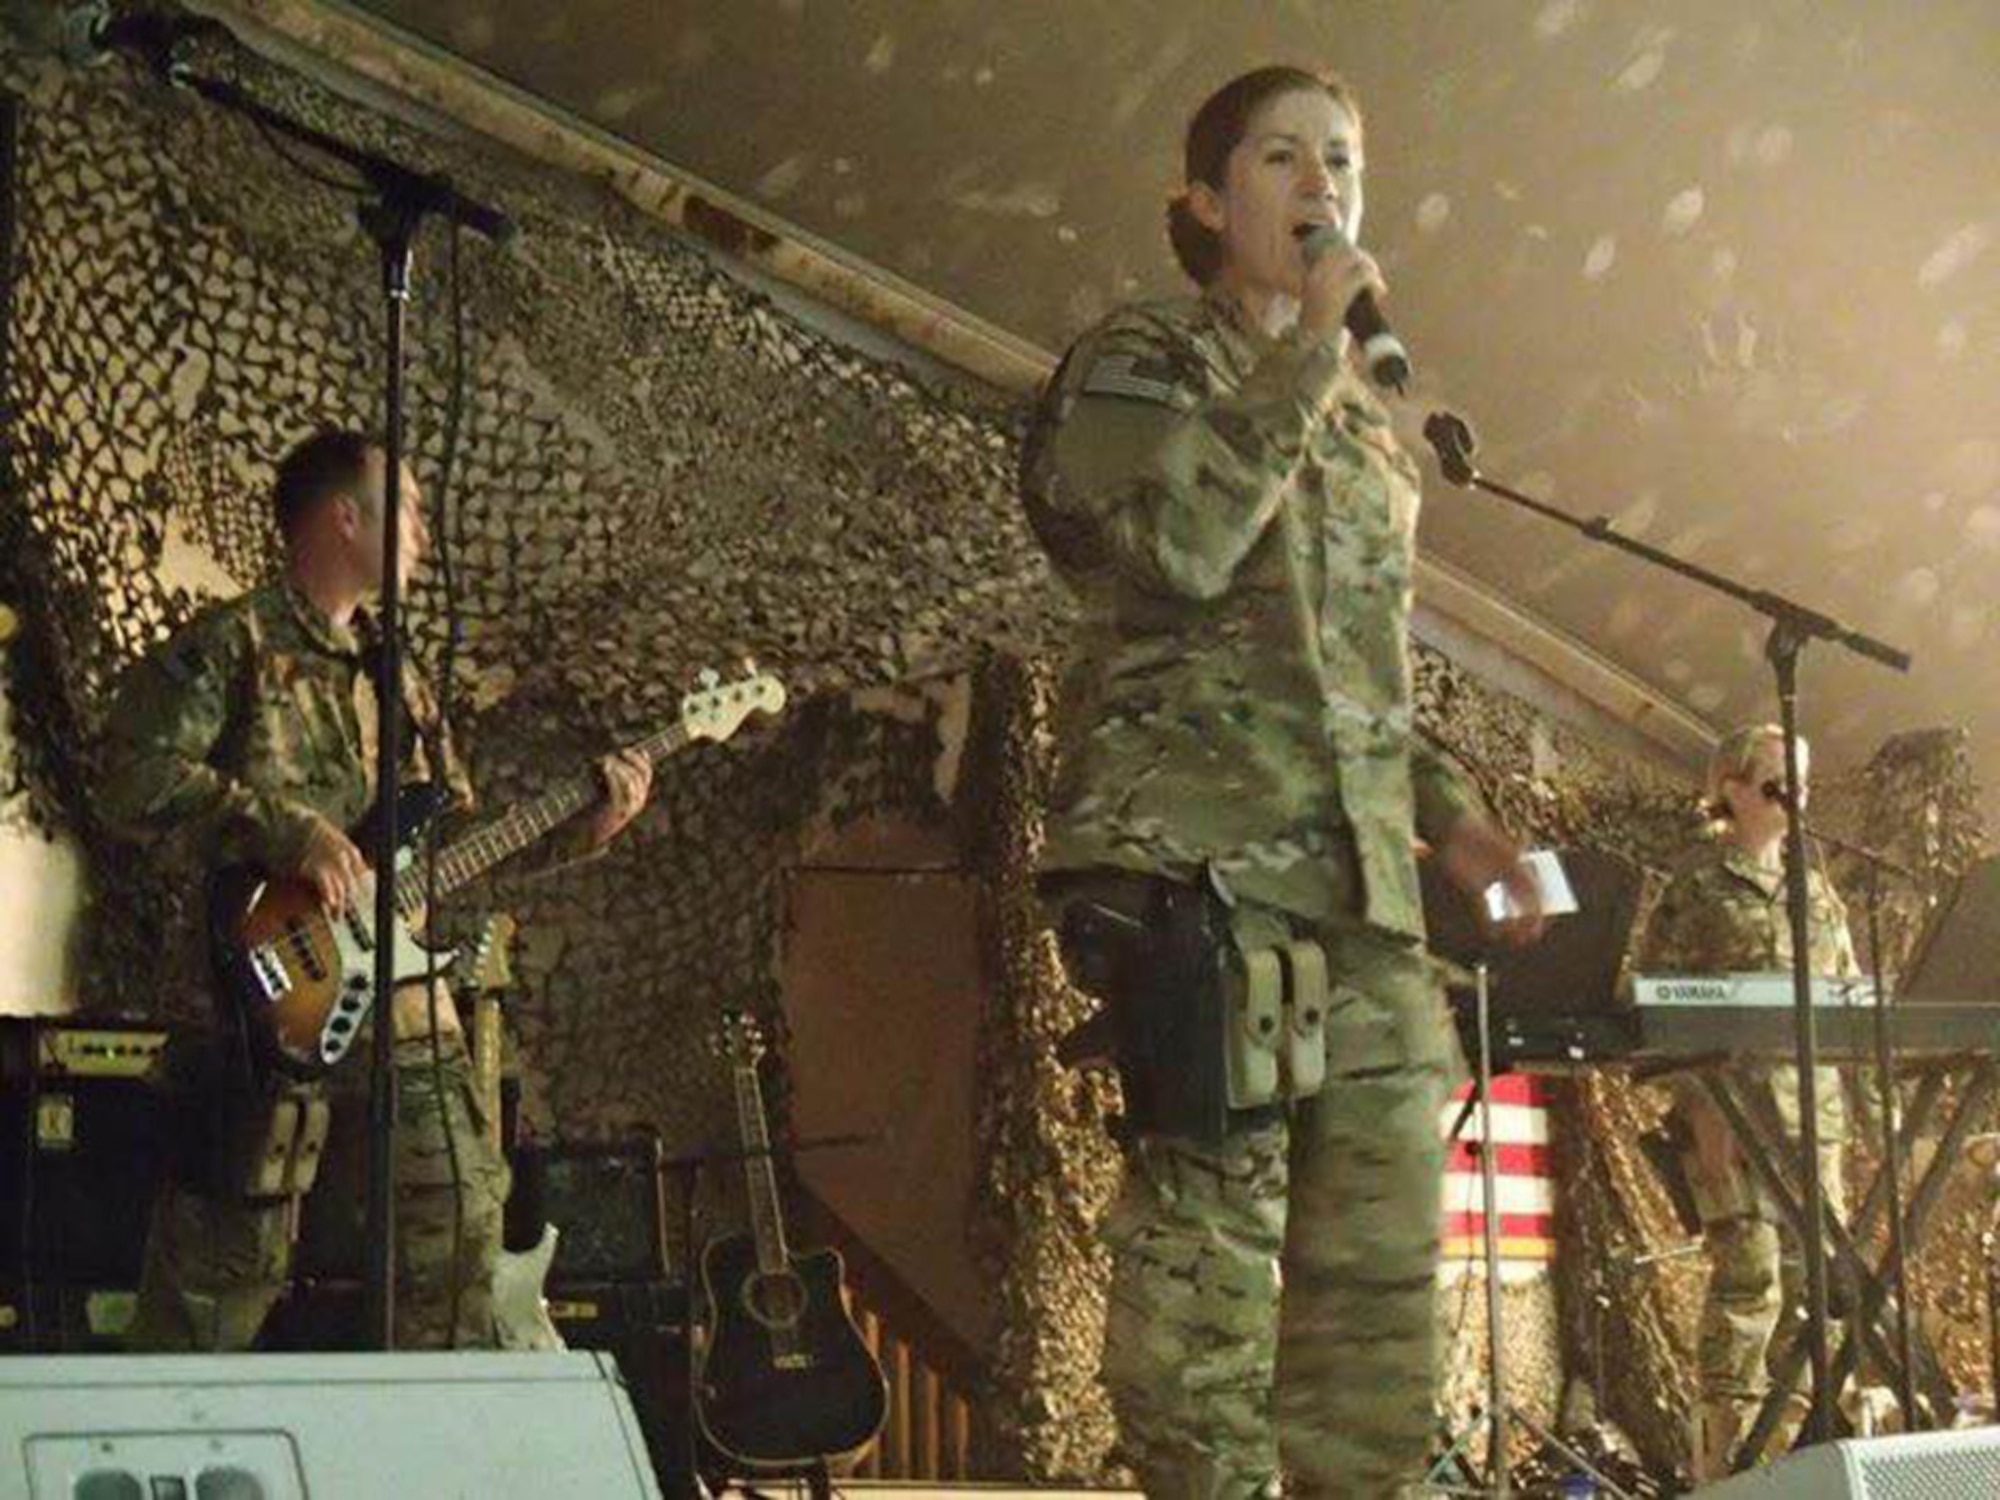 U.S. Air Force Tech. Sgt. Carrie Gatz, an instrumentalist with the 566th Air Force Band, Illinois Air National Guard, sings during a performance at an undisclosed location in Southwest Asia in 2012. Gatz was deployed in support of Operation Enduring Freedom. (Courtesy photo)